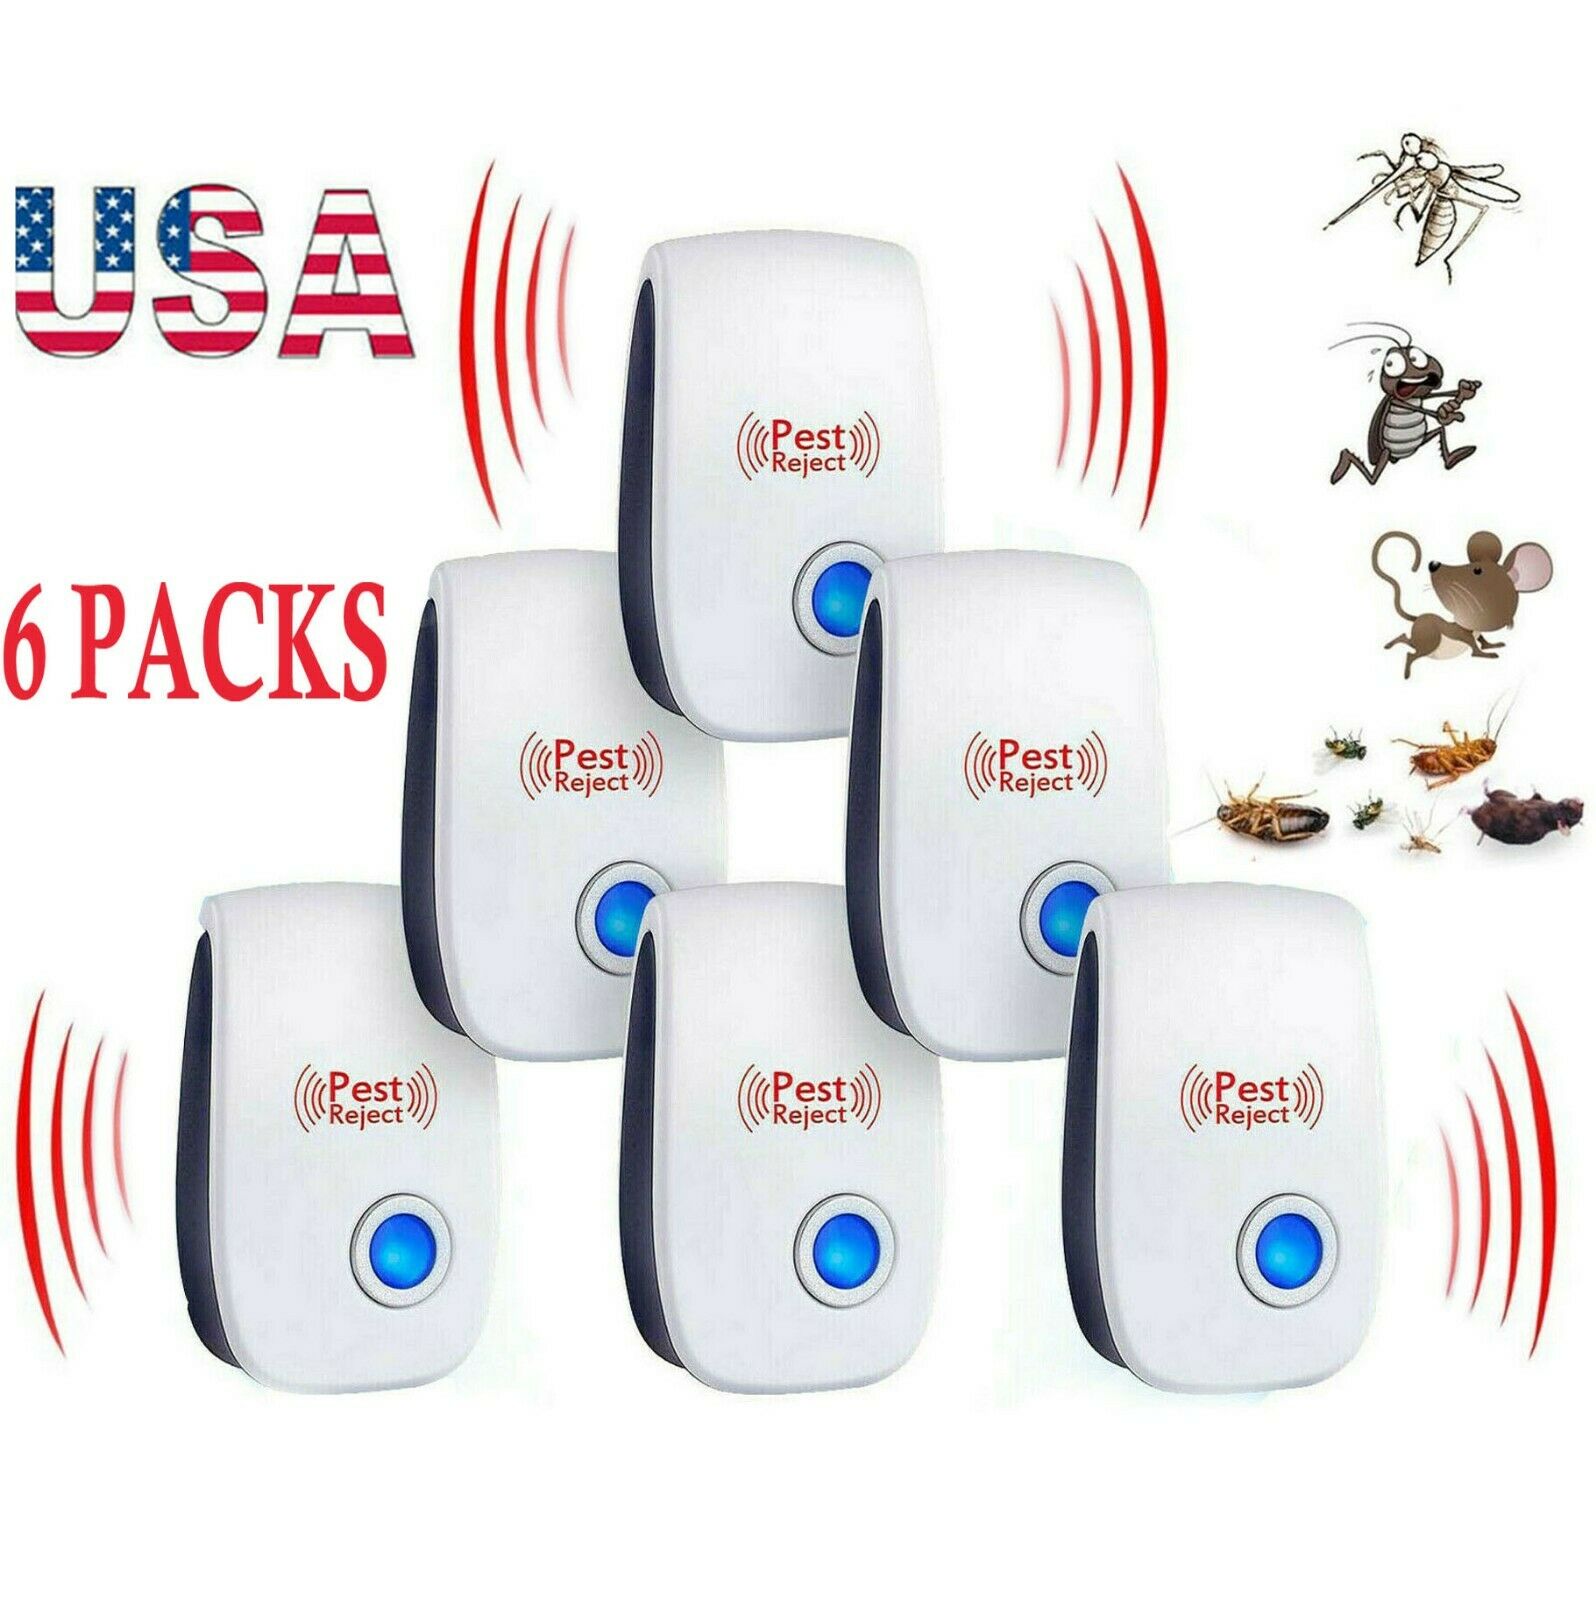 Usa 6 Pack Ultrasonic Pest Repeller Reject Mice Insect Mosquito Cockroach Killer